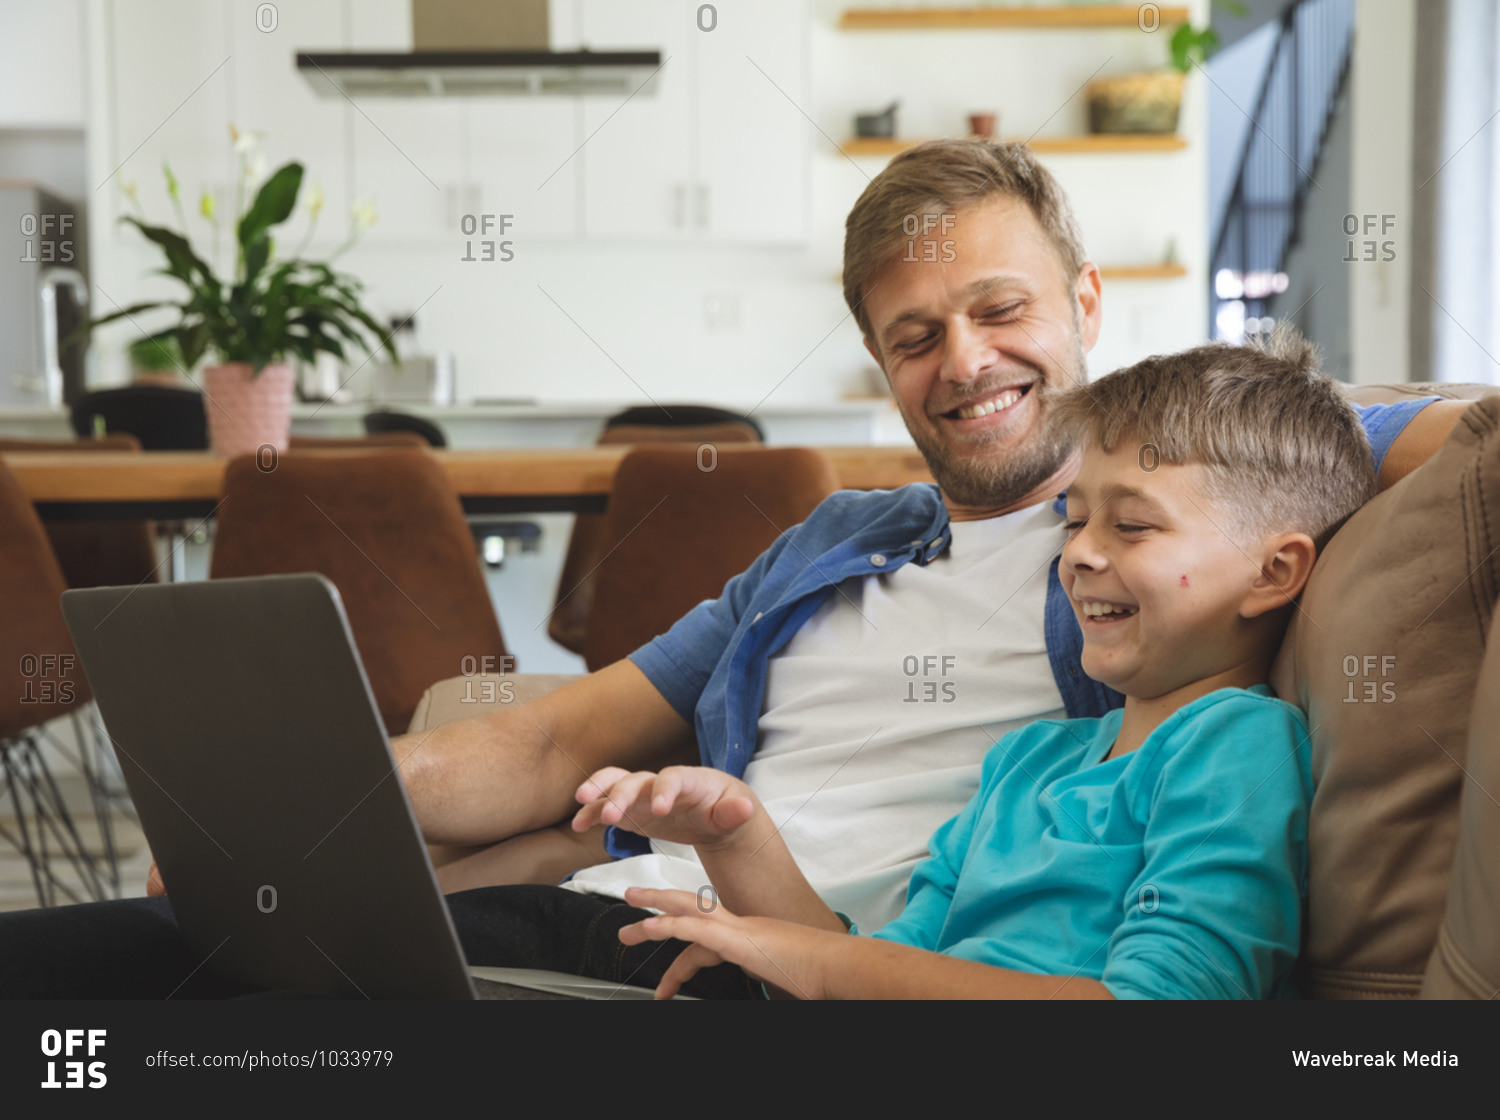 Caucasian man at home with his son together, sitting on sofa in living room, using laptop computer, smiling. Social distancing during Covid 19 Coronavirus quarantine lockdown.